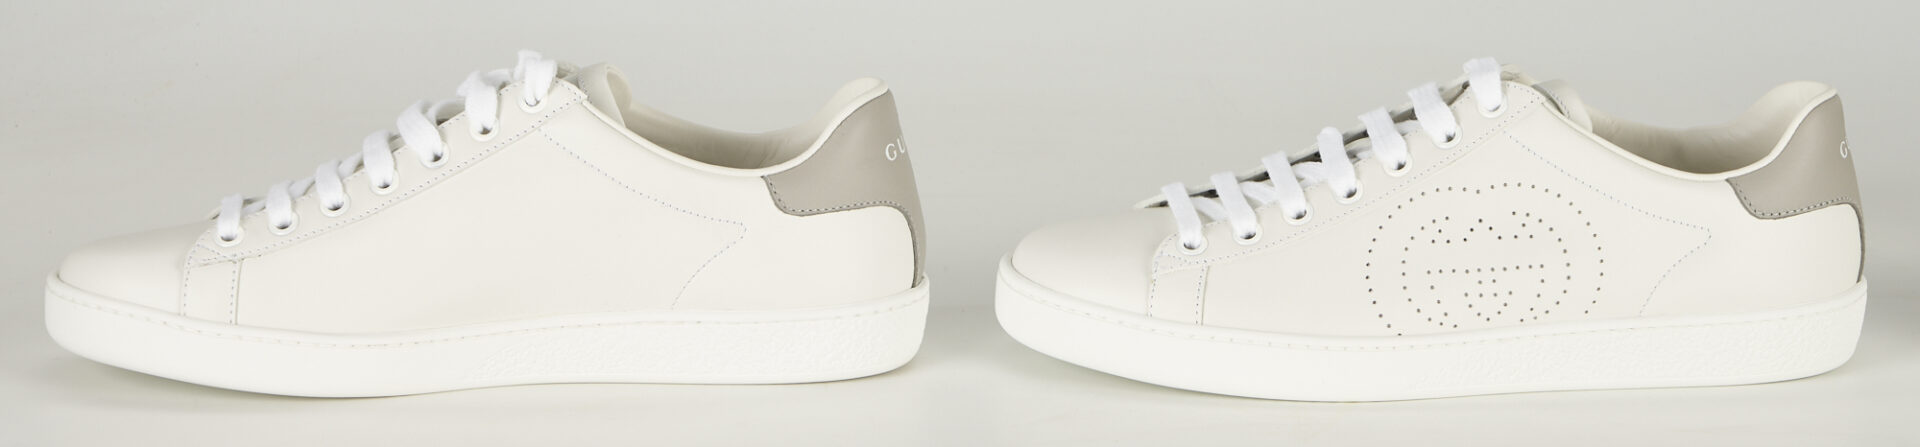 Lot 102: 2 Pairs of Gucci Ace Leather Sneakers